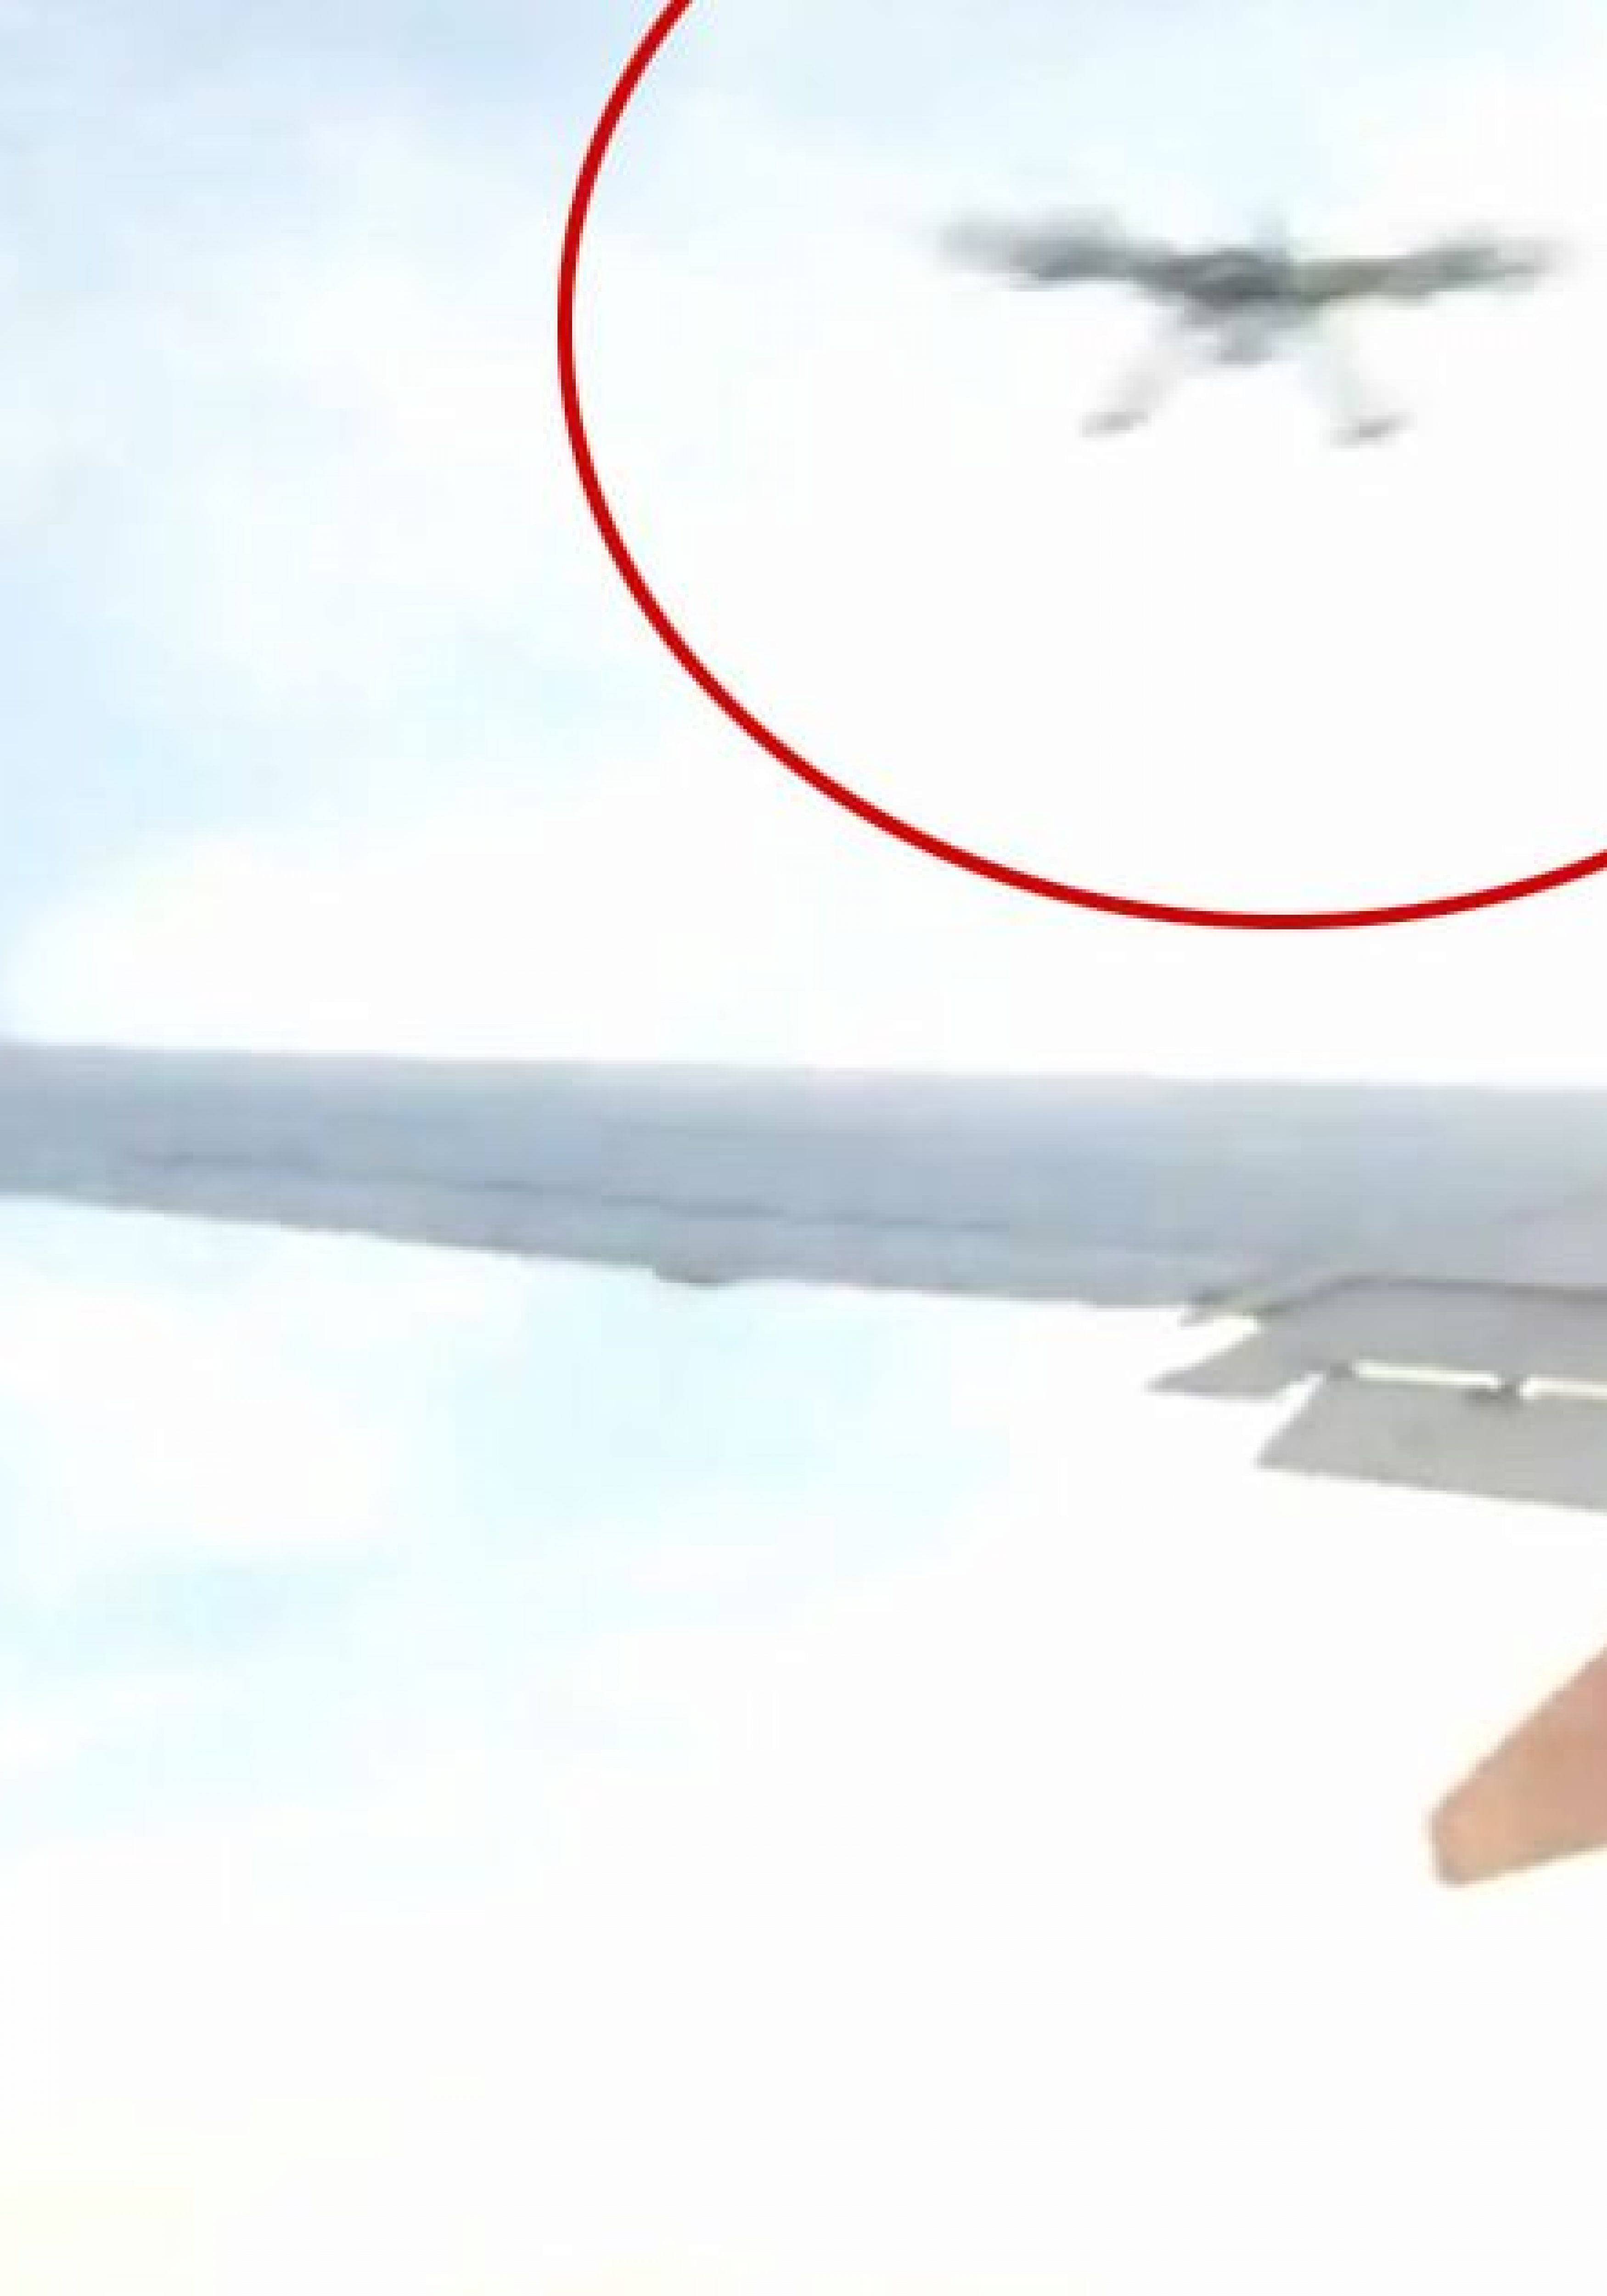 Footage-shows-drone-hit-plane-wing-3500x5000.jpg